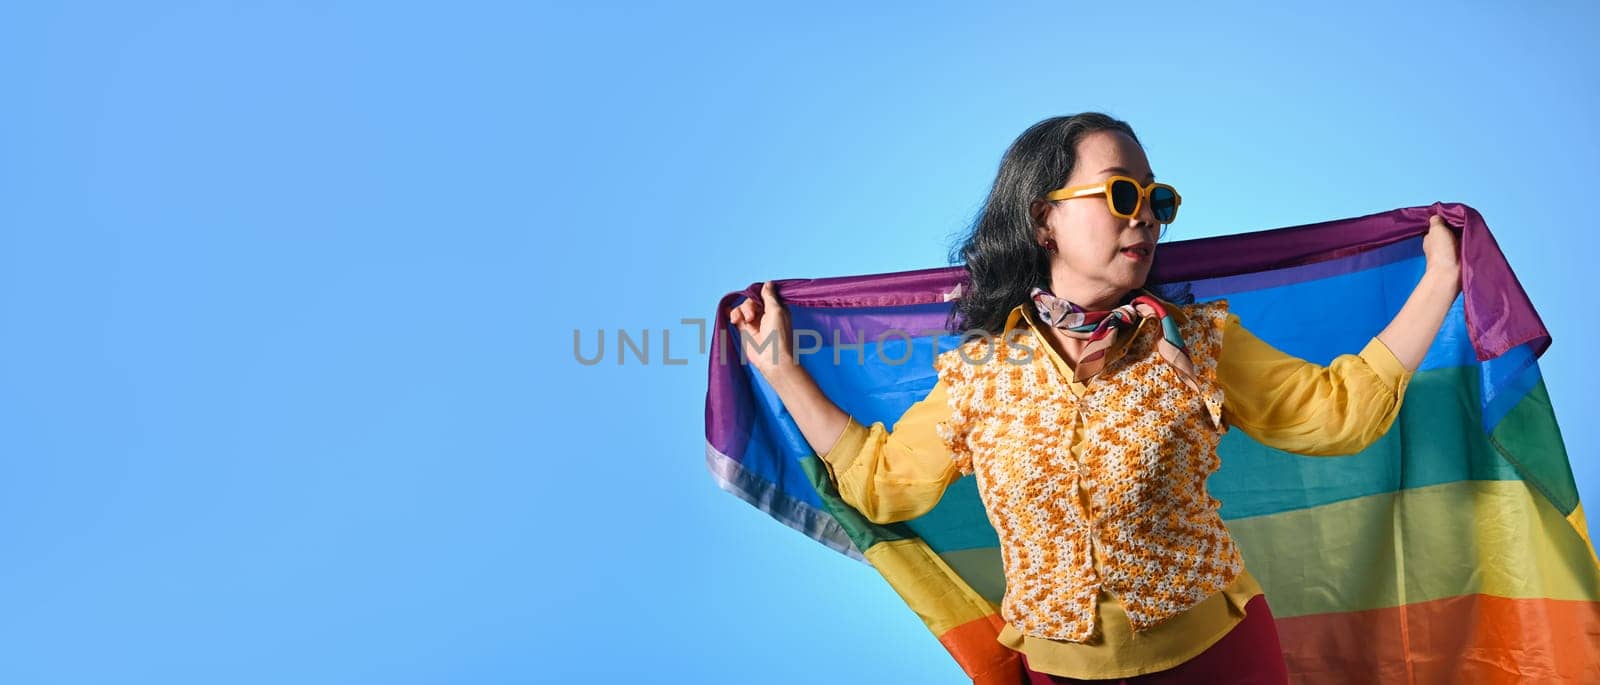 Beautiful mature woman waving rainbow flag on blue background. LGBT, human rights and equality concept.